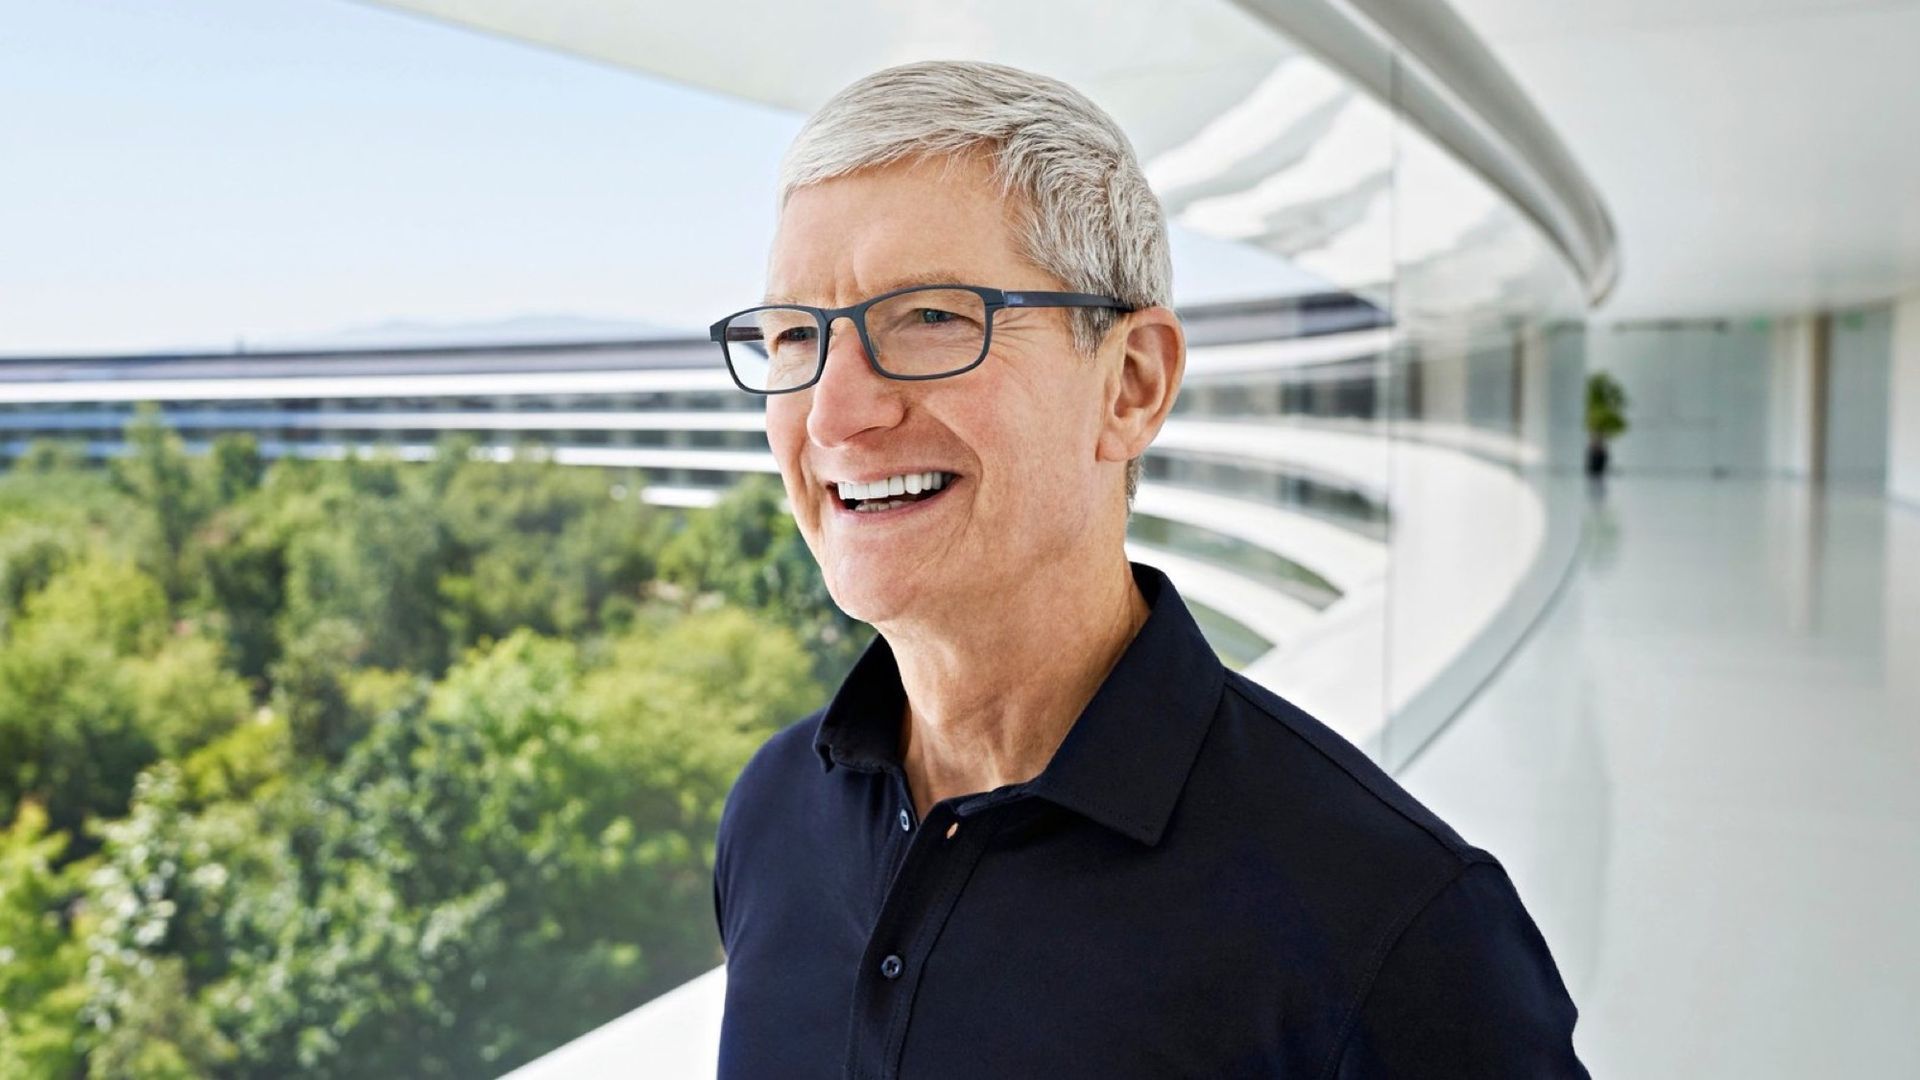 Tim Cook cuts his own pay following criticism of high compensation